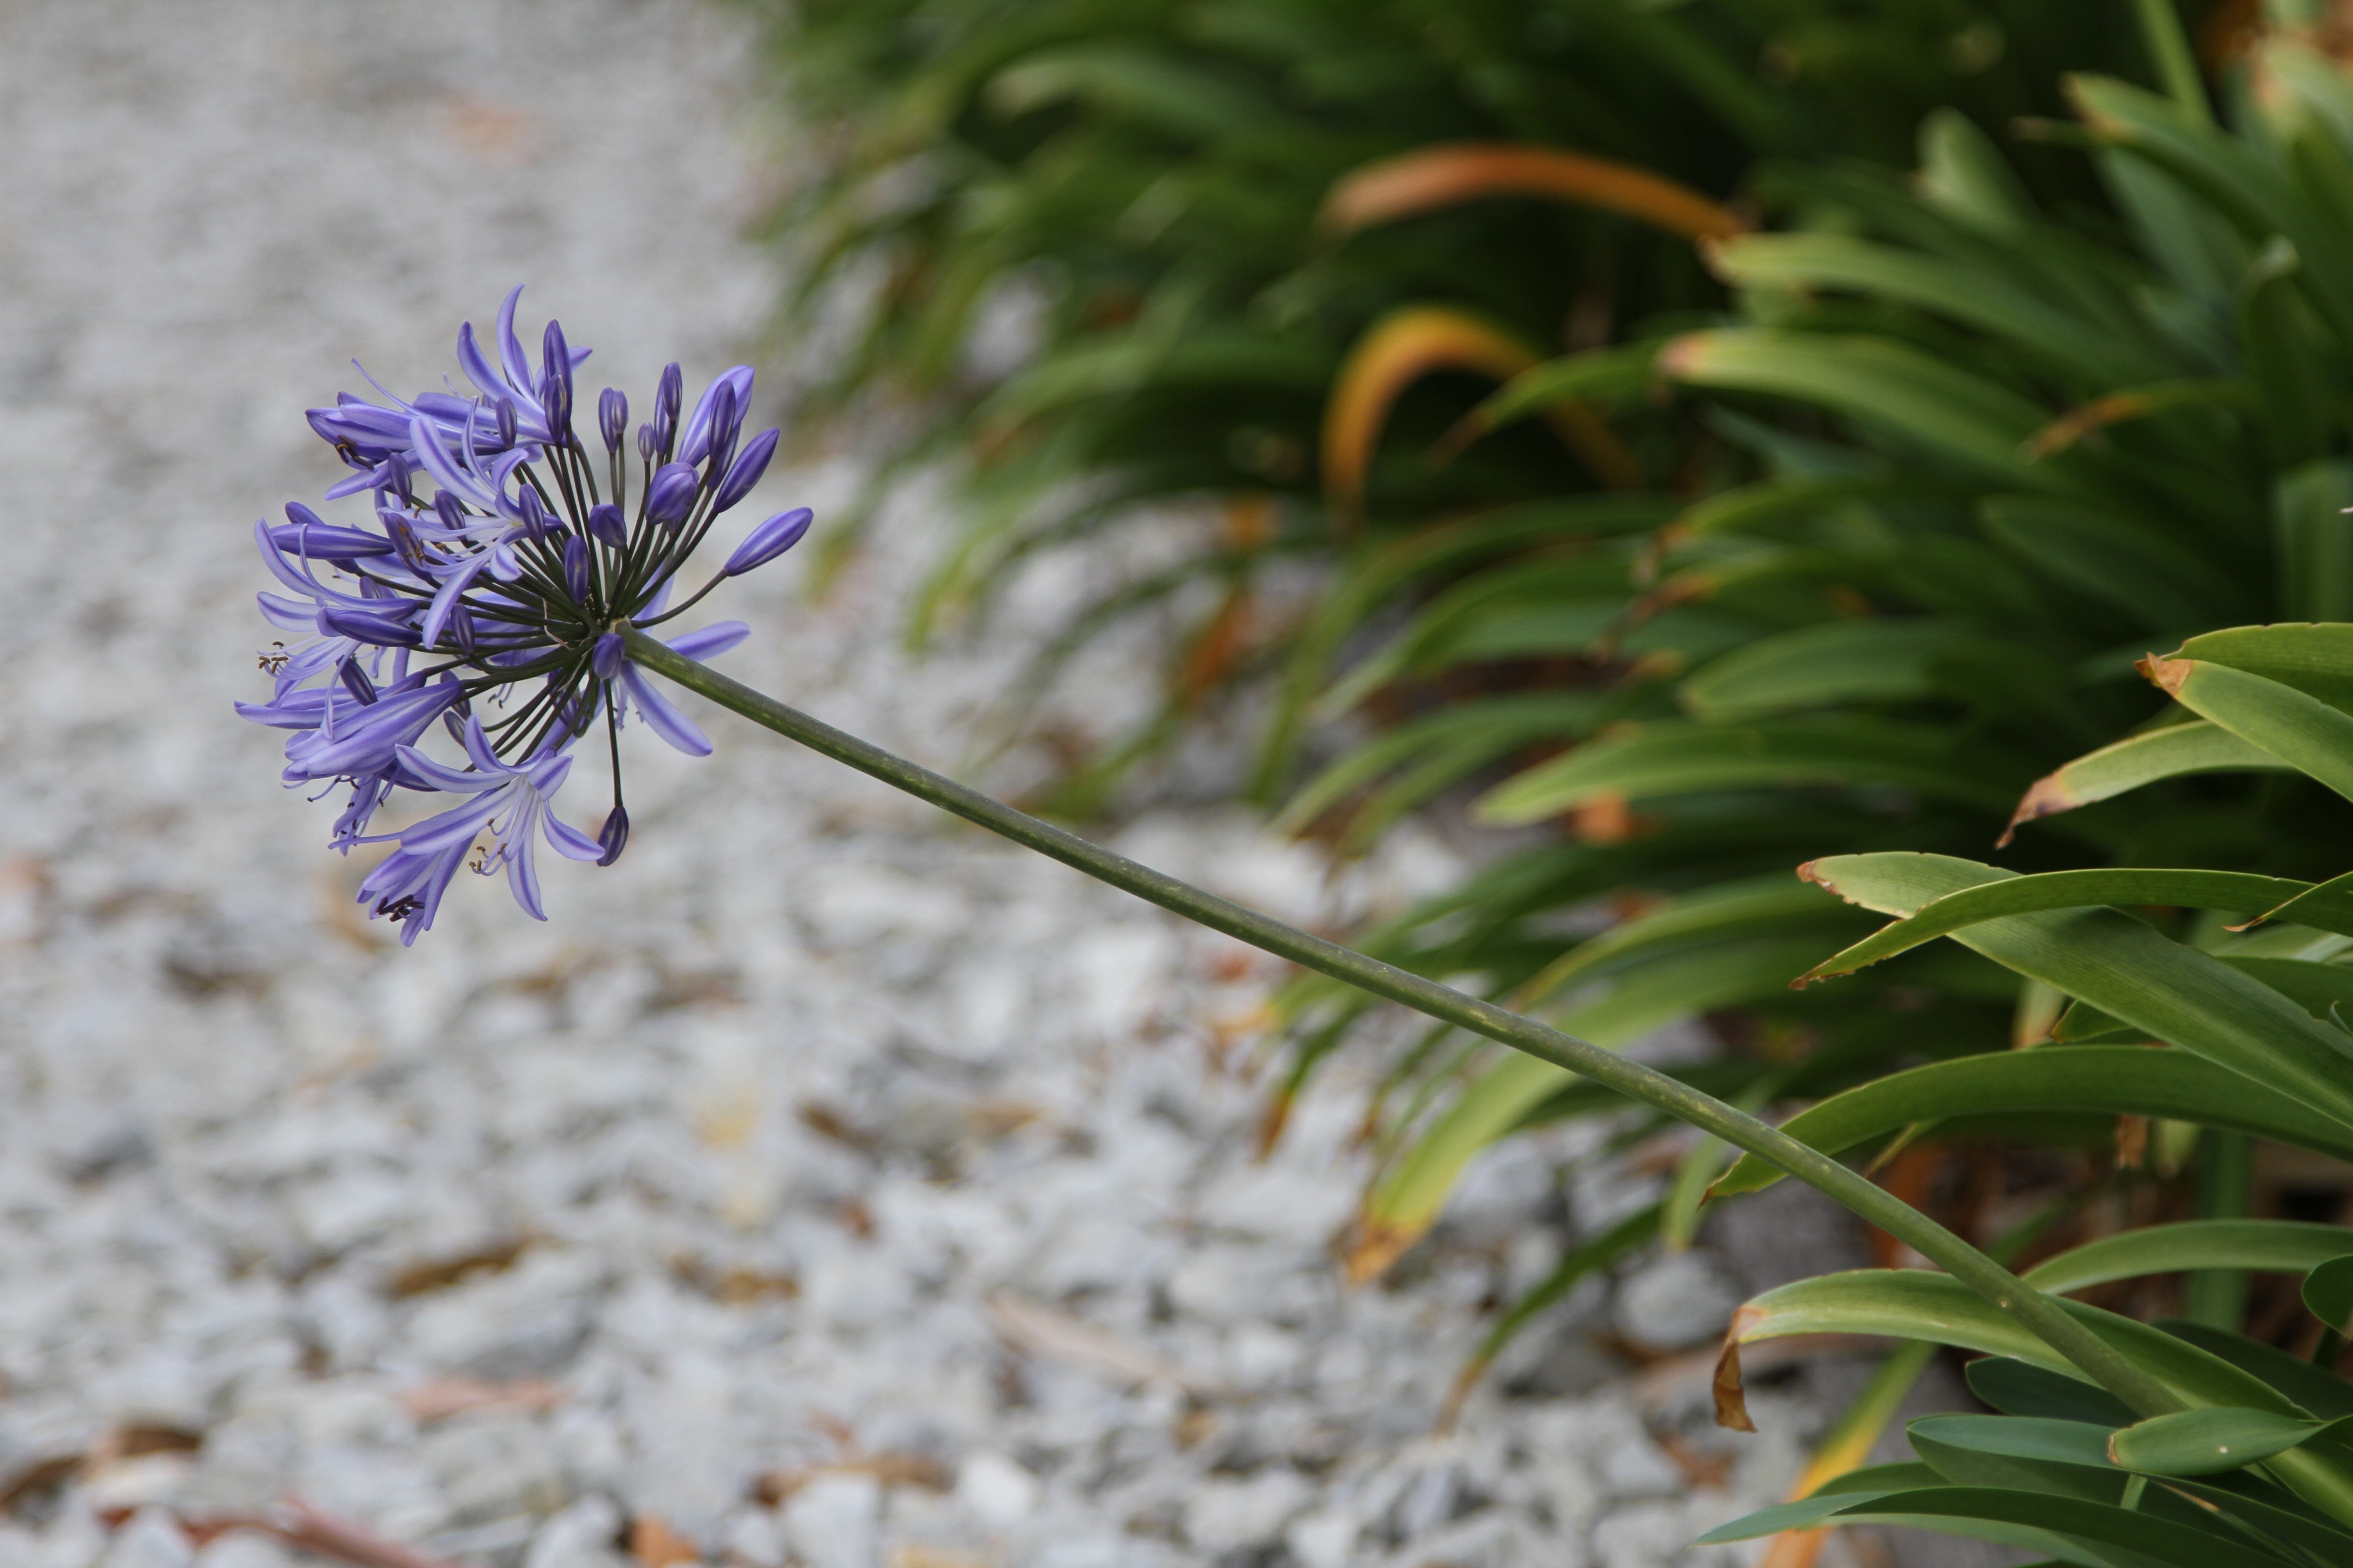 Agapanthus Flower and Leaves